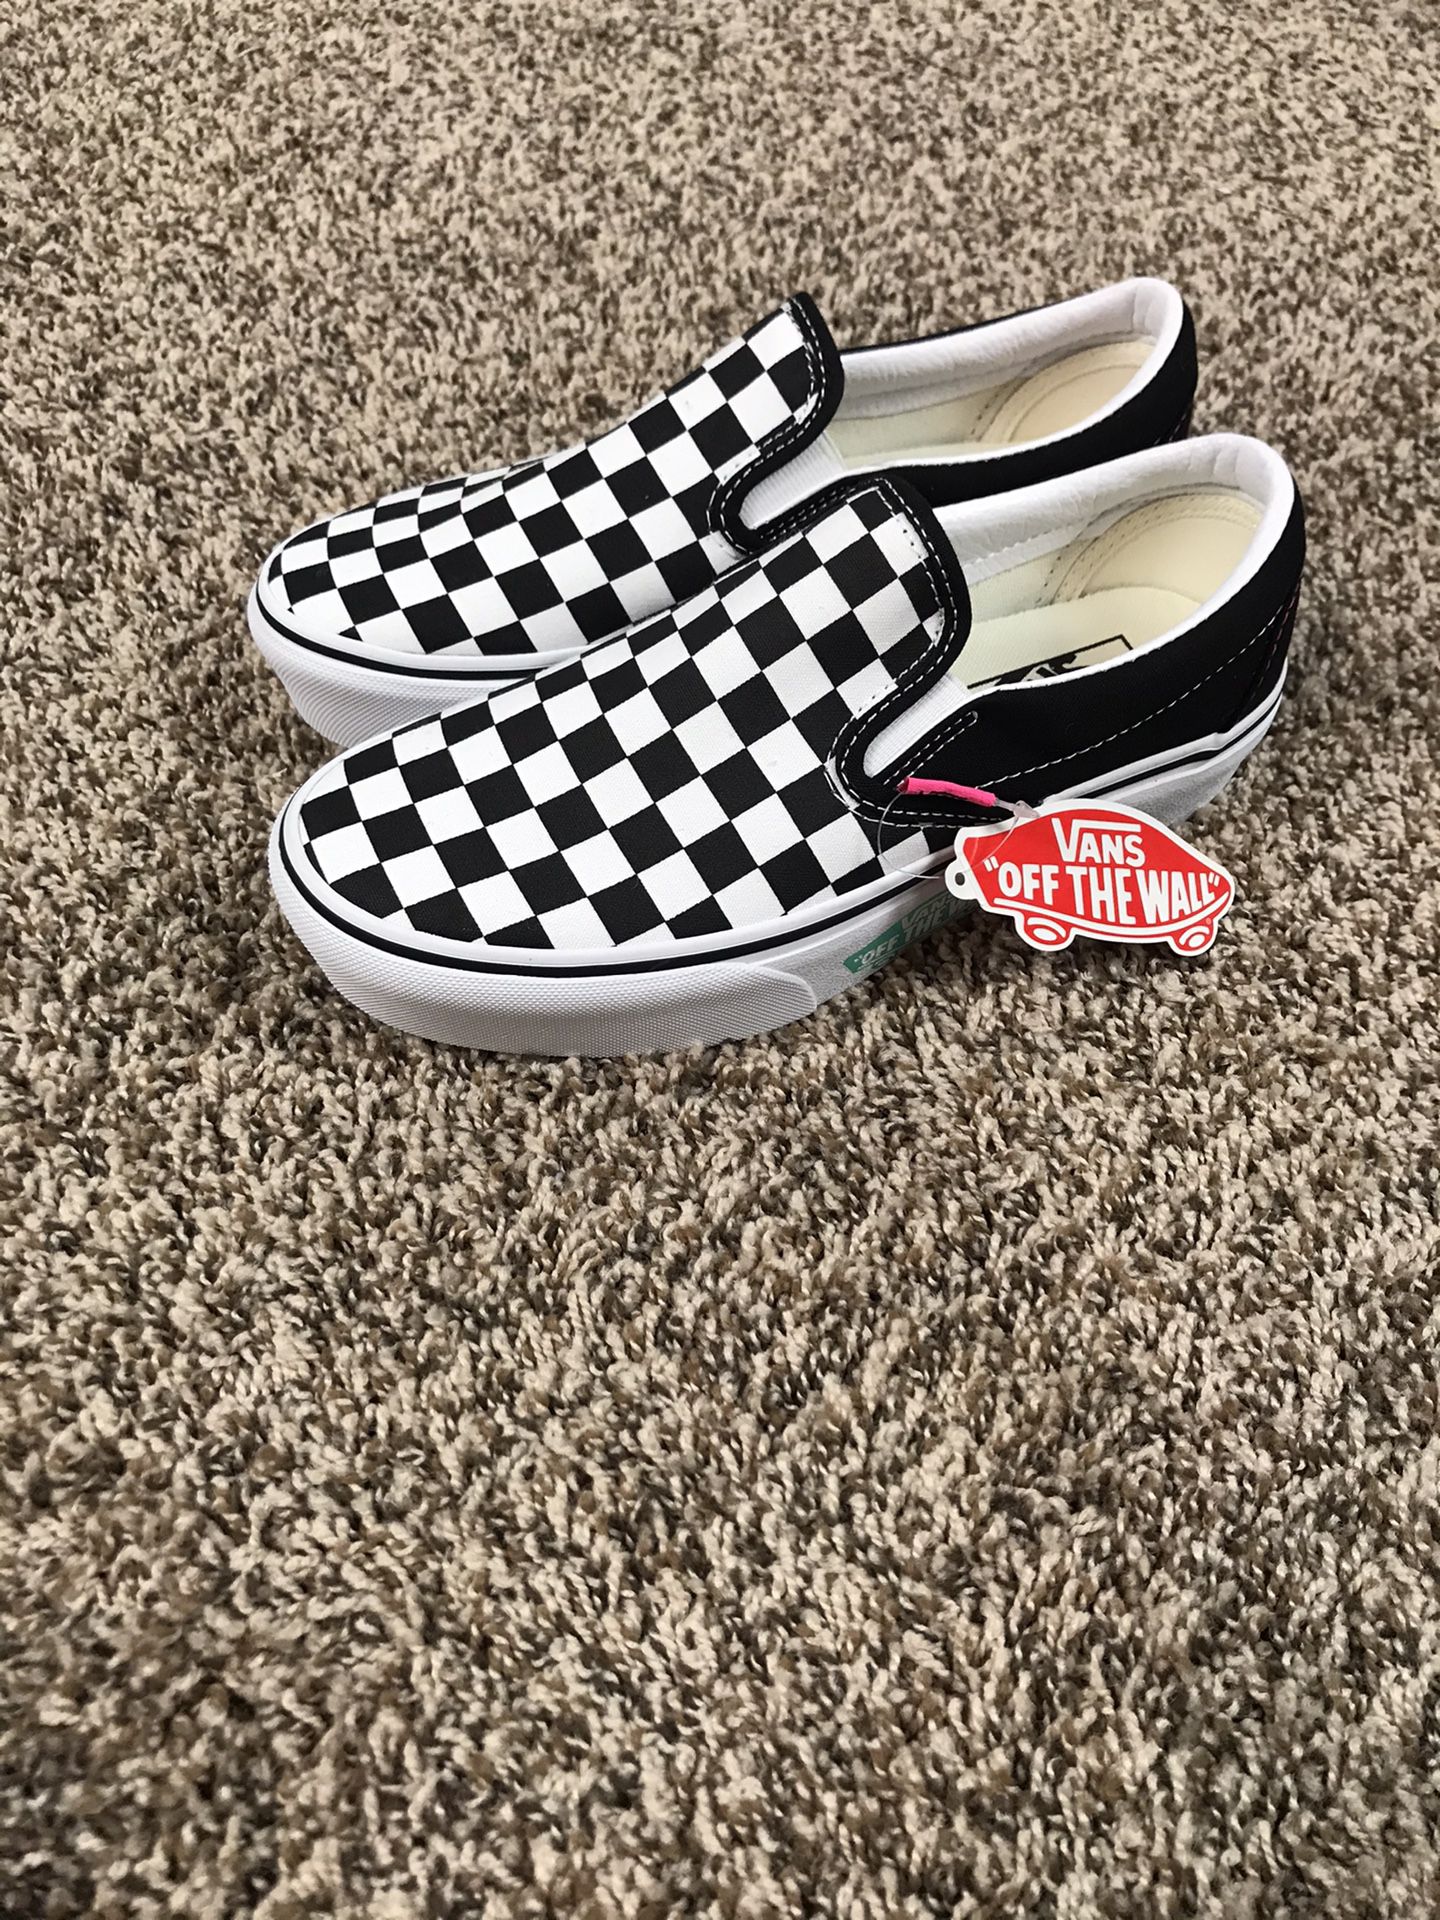 Vans Slip-on Shoes Checkerboard Womens Size 5.5 New with tags New without box